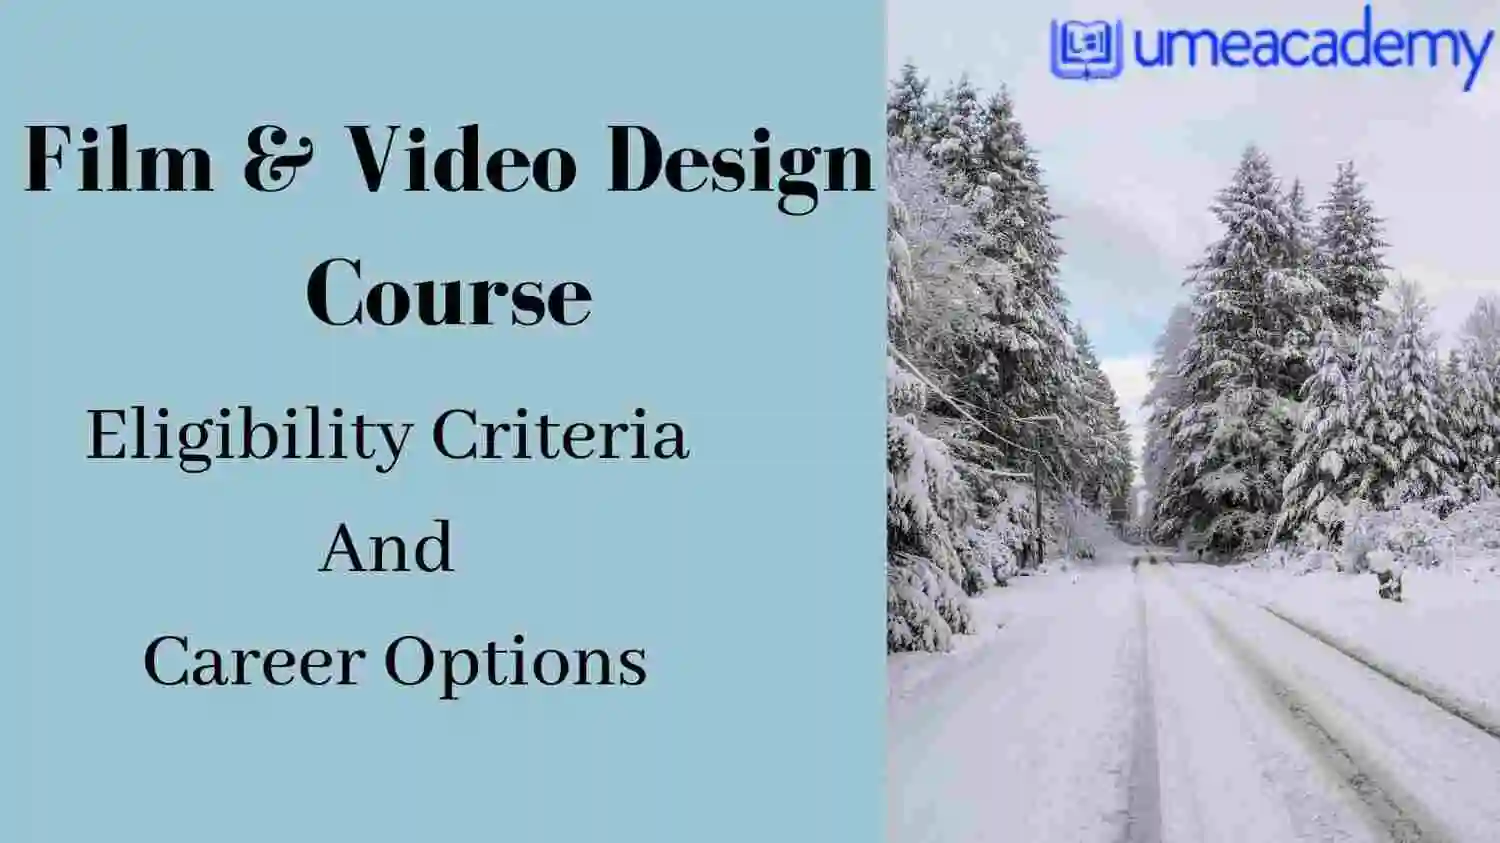 Know about Film & Video Design Course: Eligibility, Career Options